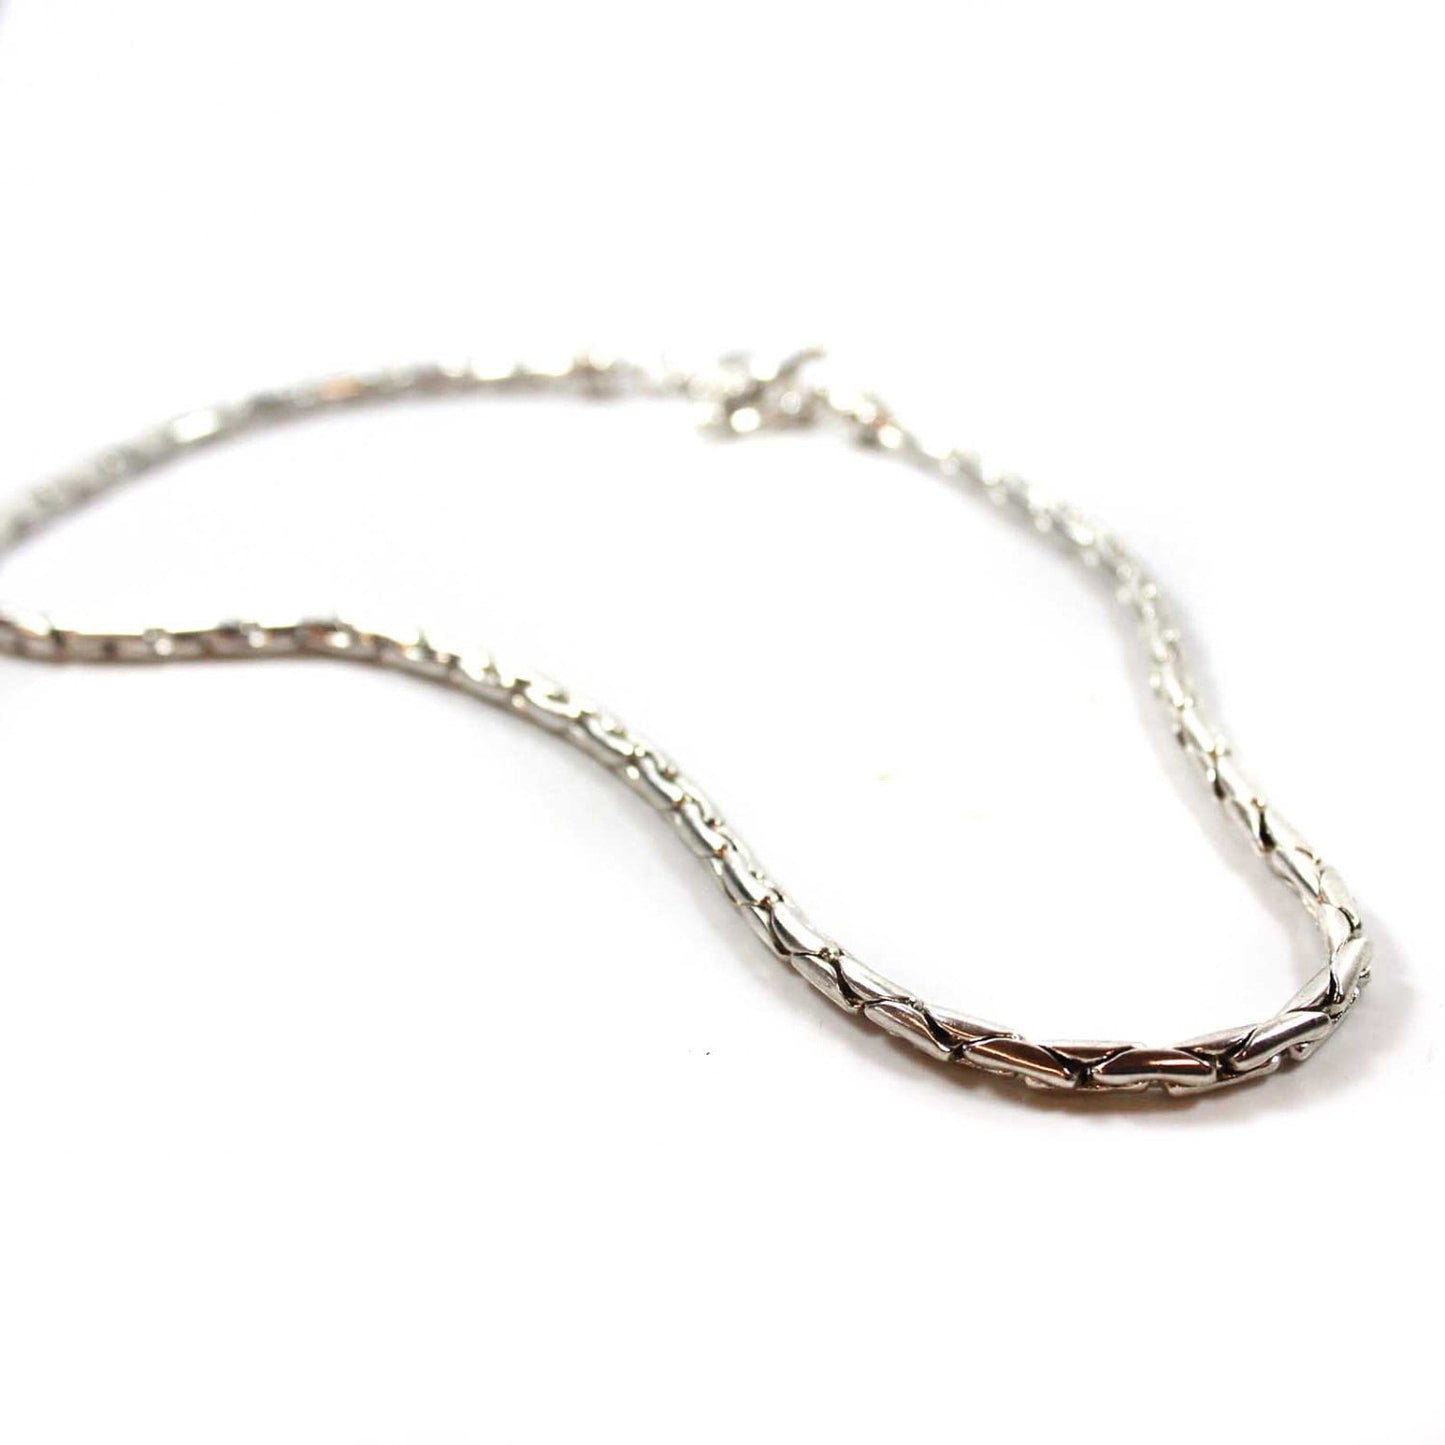 Vintage Oscar De La Renta 14 Inch Silver Tone Rounded Cobra Chain Necklace Toggle Clasp #OS127 - Limited Stock - Never Worn